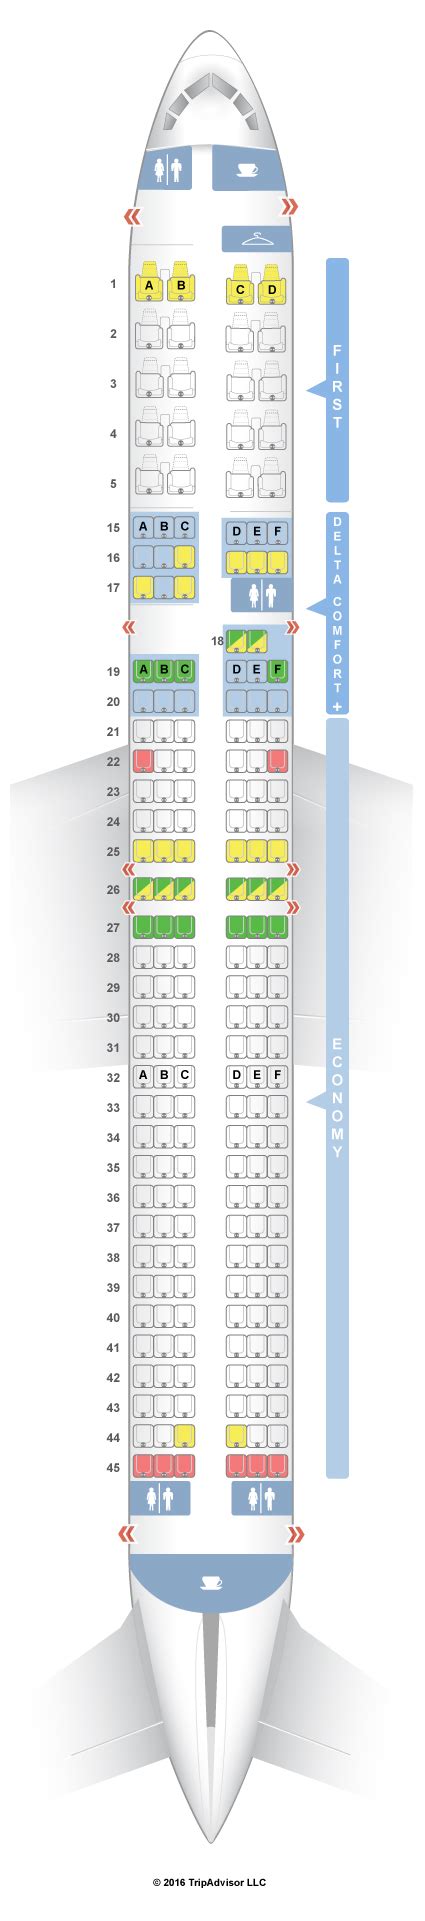 For your next Delta flight, use this seating c